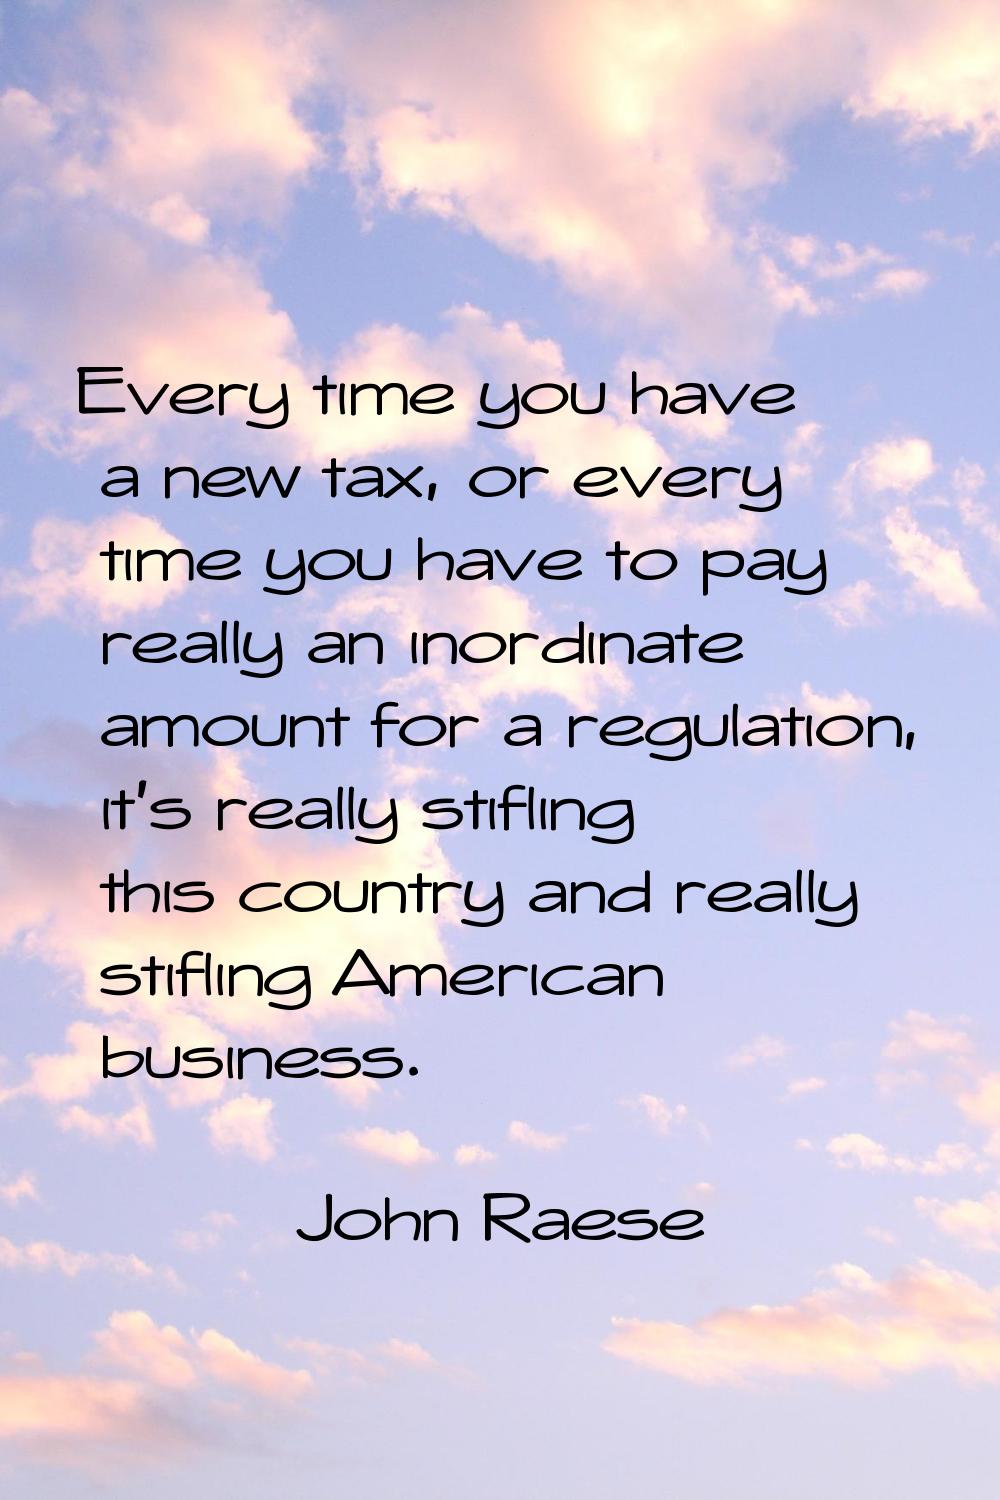 Every time you have a new tax, or every time you have to pay really an inordinate amount for a regu